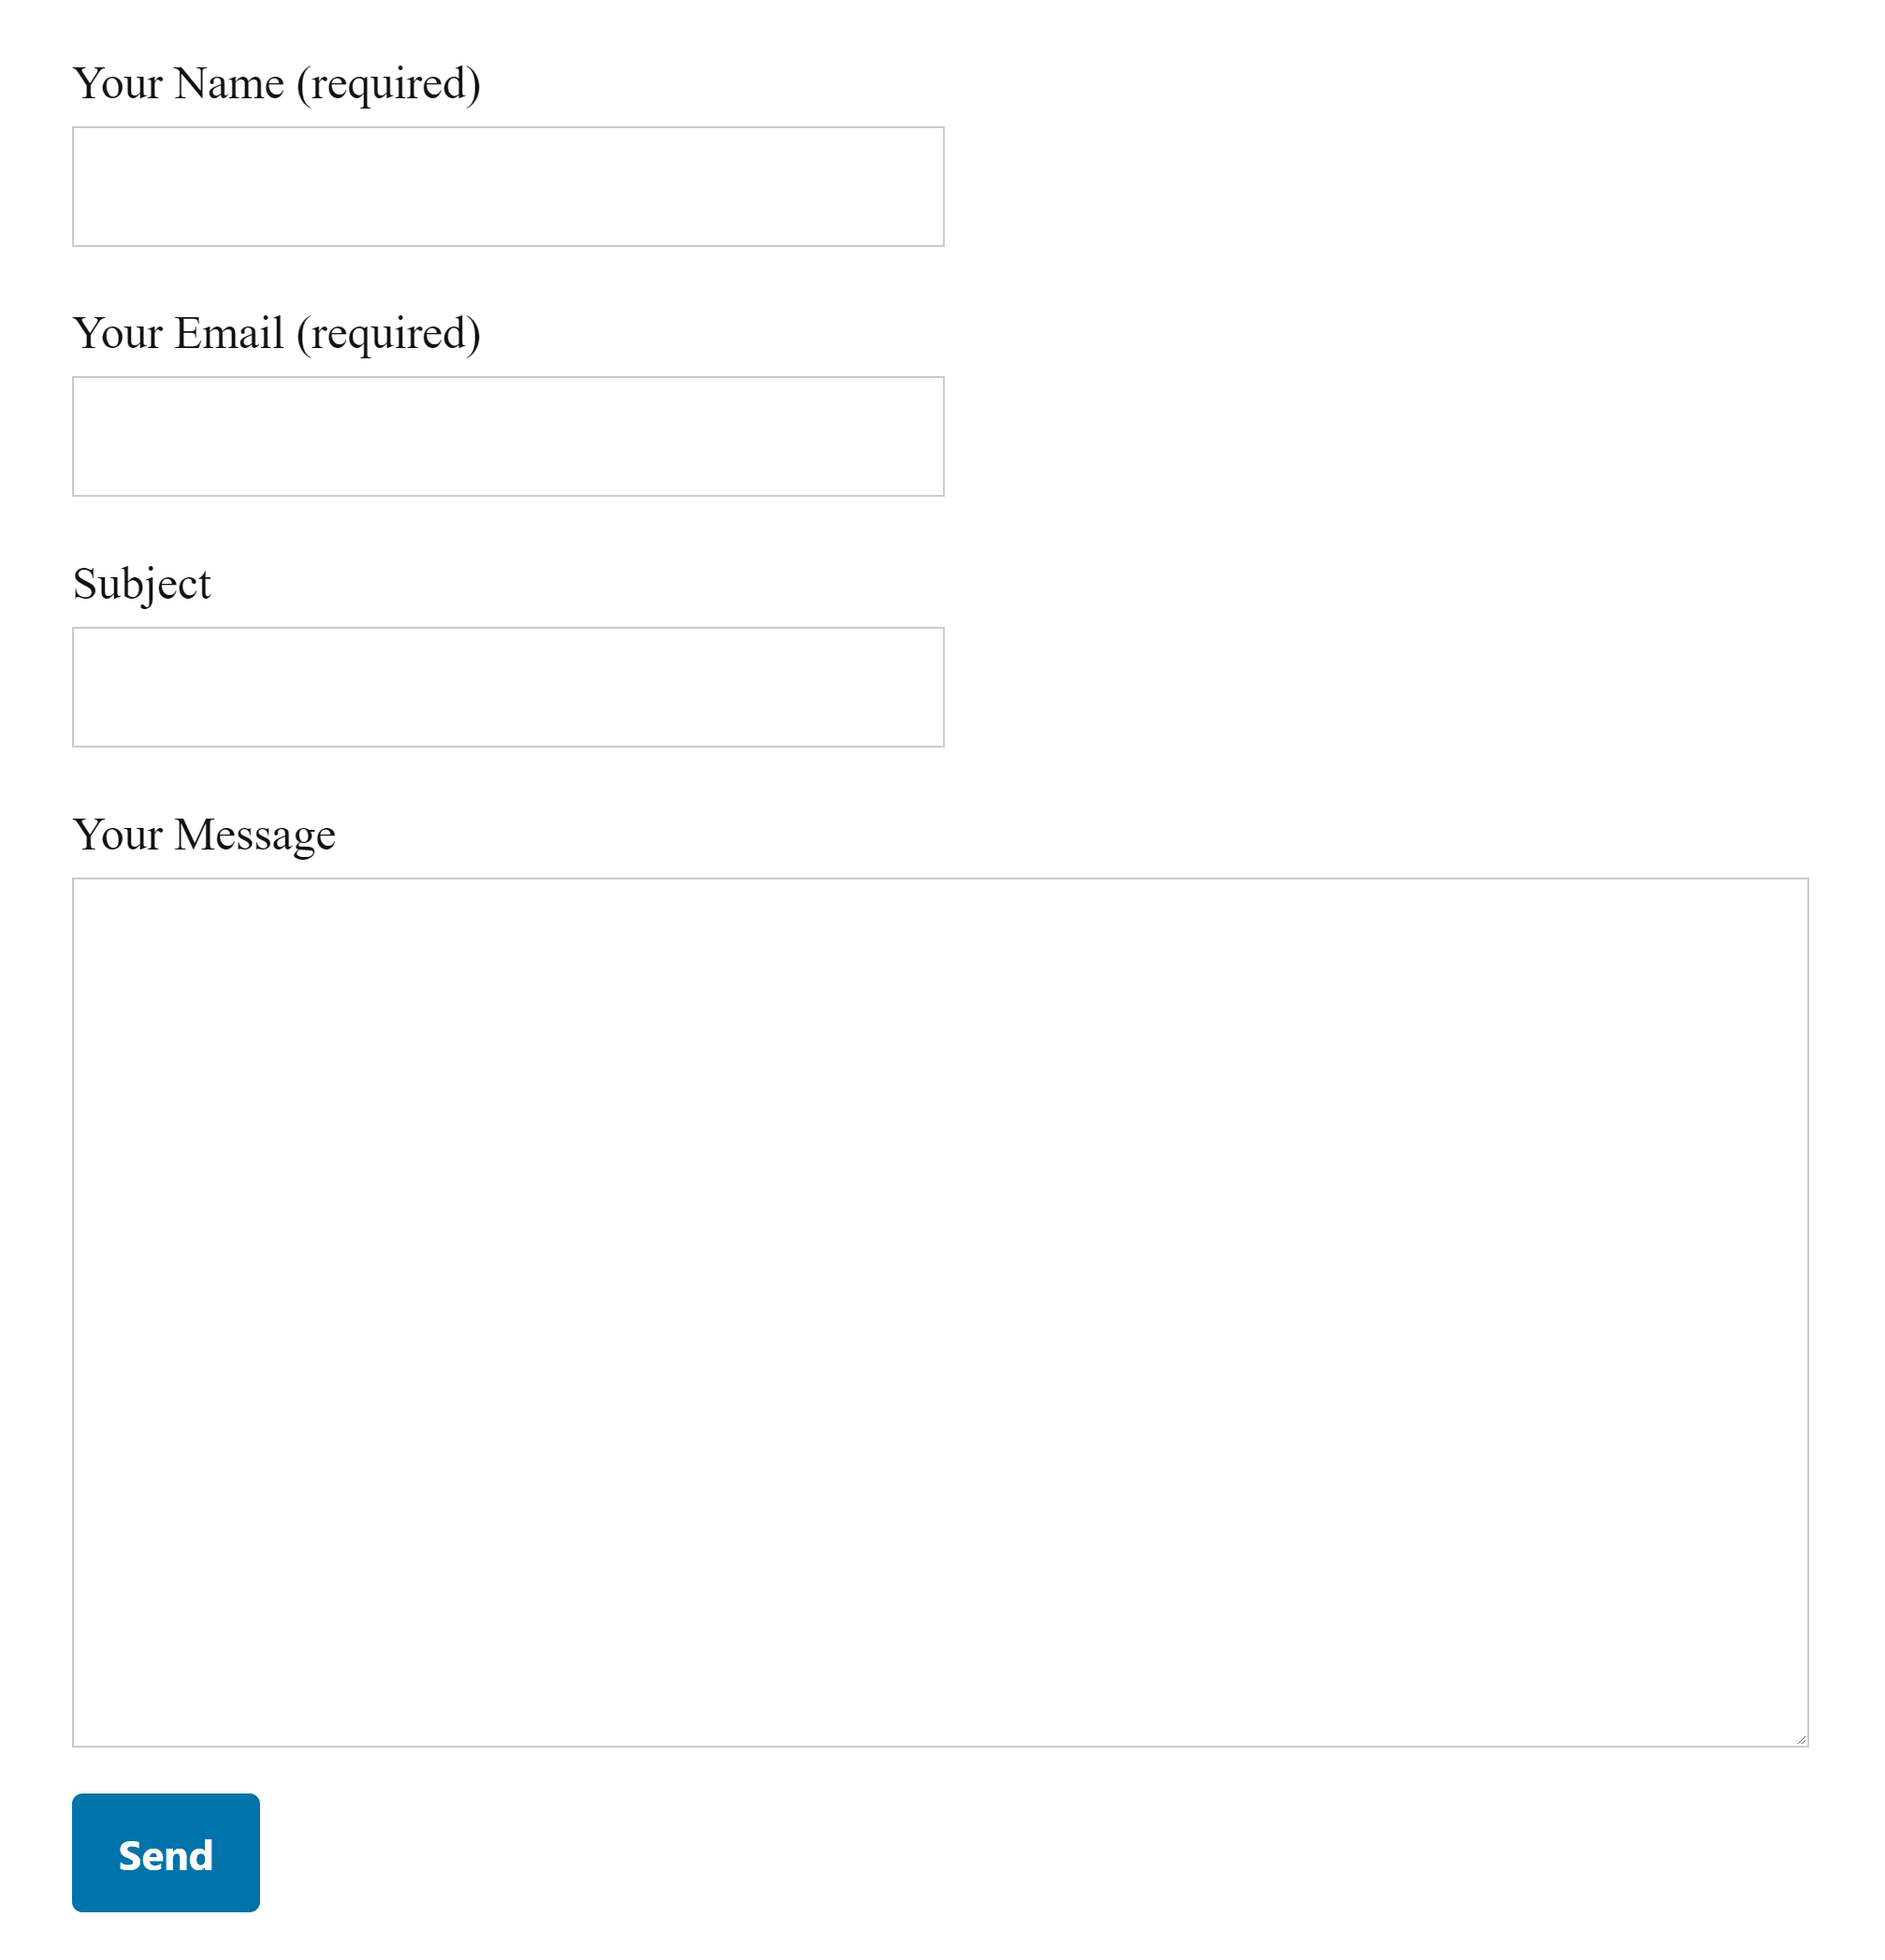 Contact Form 7 Example